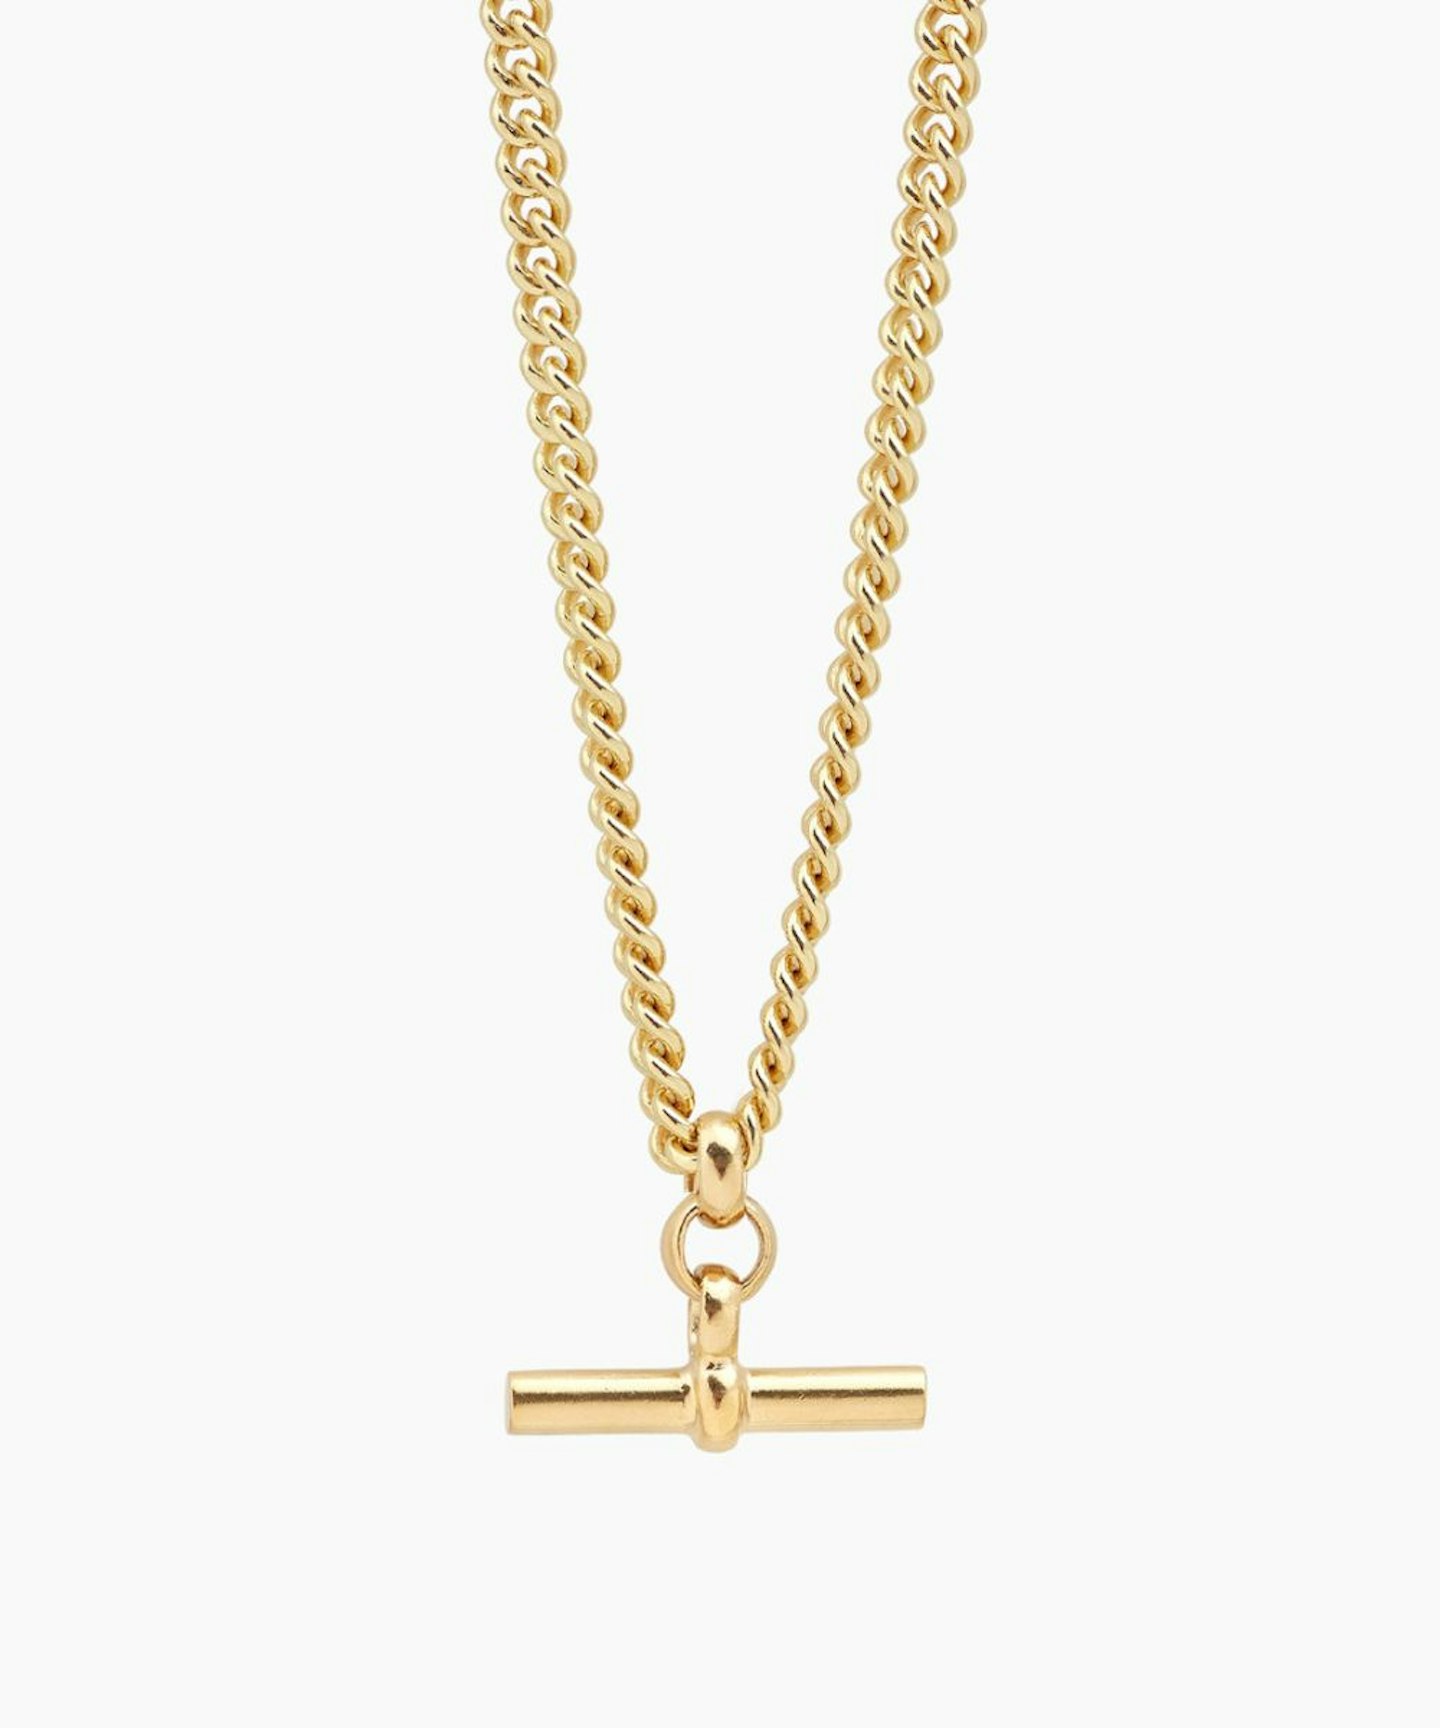 Gold T-Bar Curb Link Necklace